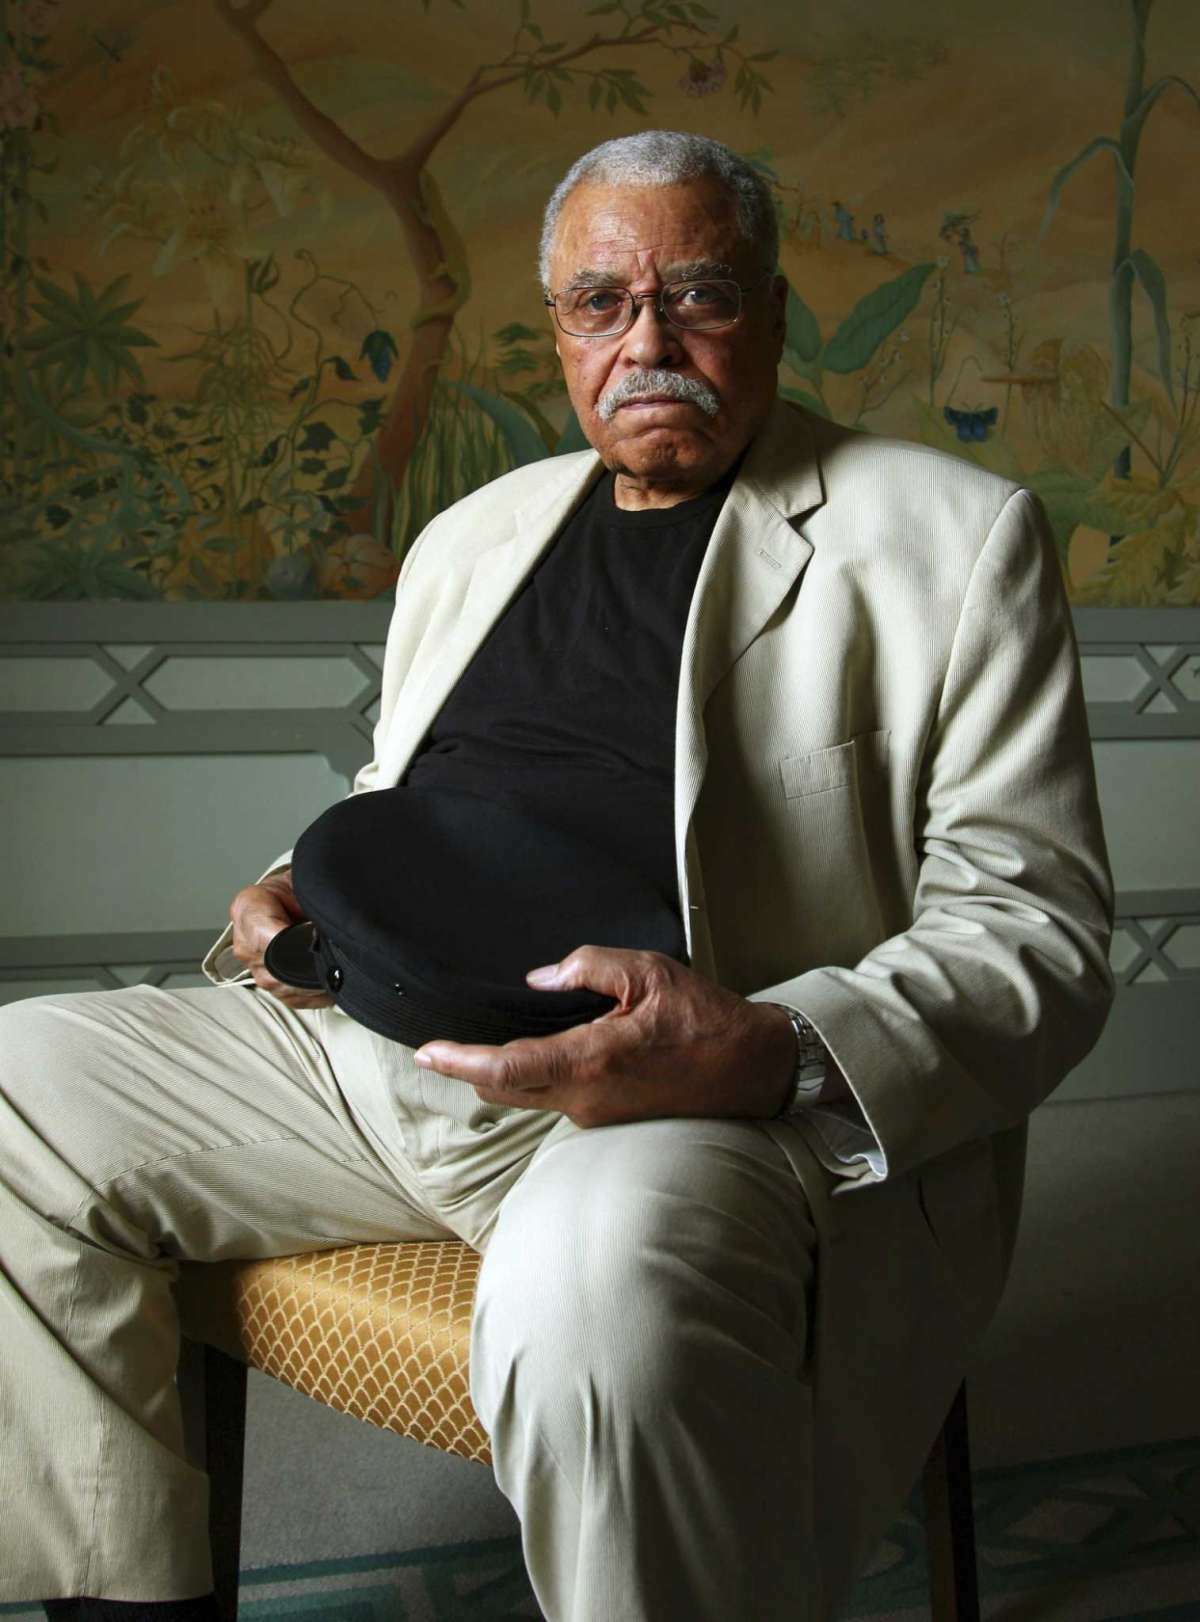 In this Jan. 7, 2013 file photo, actor James Earl Jones poses for photos in Sydney, Australia. James Earl Jones will be recognized for his voiceover career. A statue dedicated to the actor is being planned for Manistee County, where he attended school. 